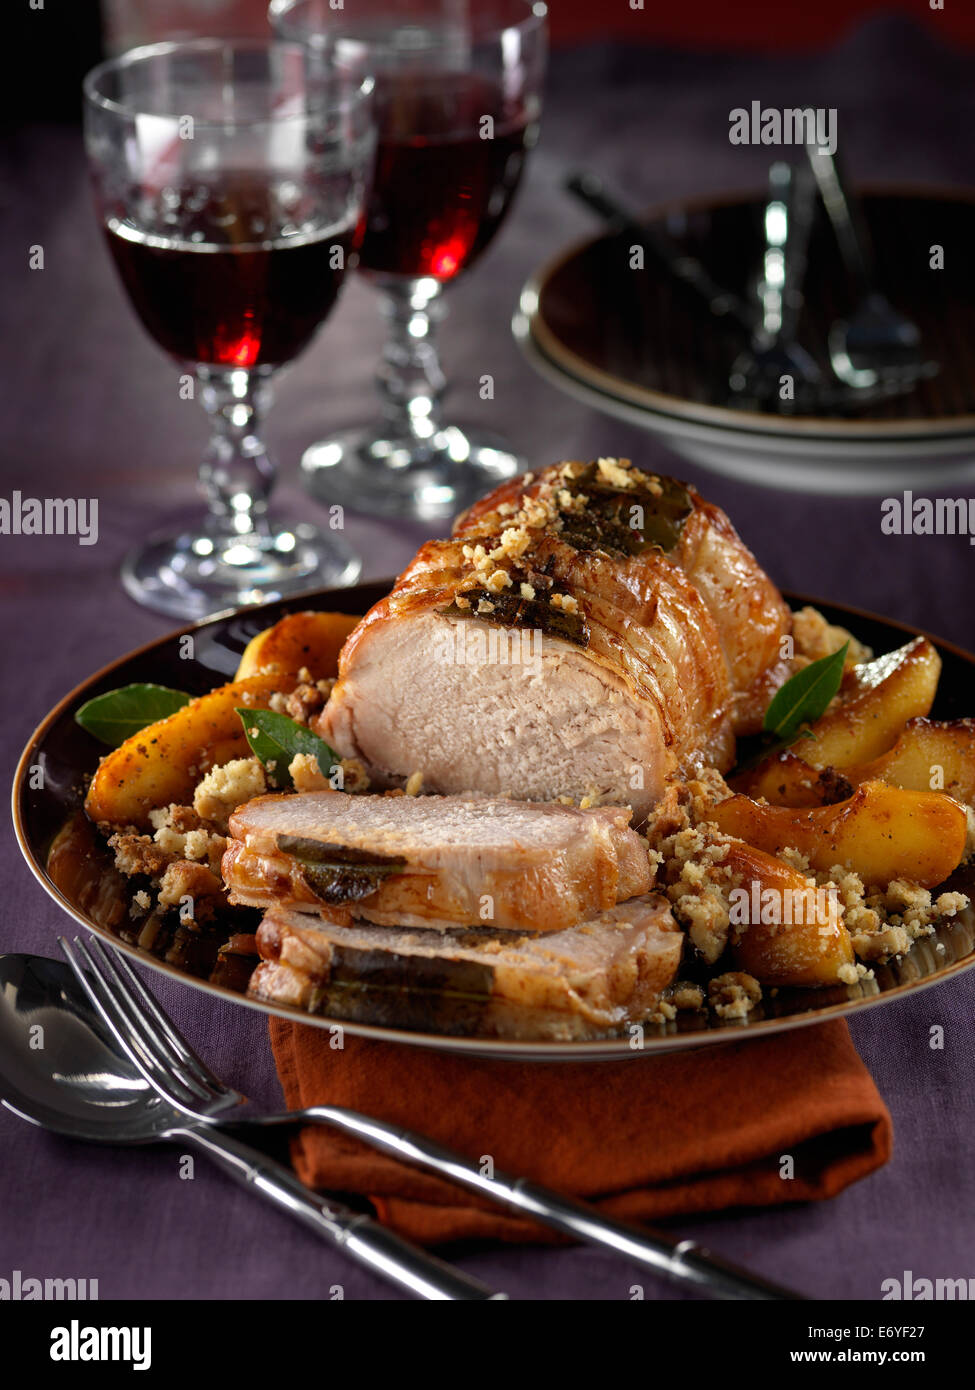 Roast pork with crumbled bread Stock Photo